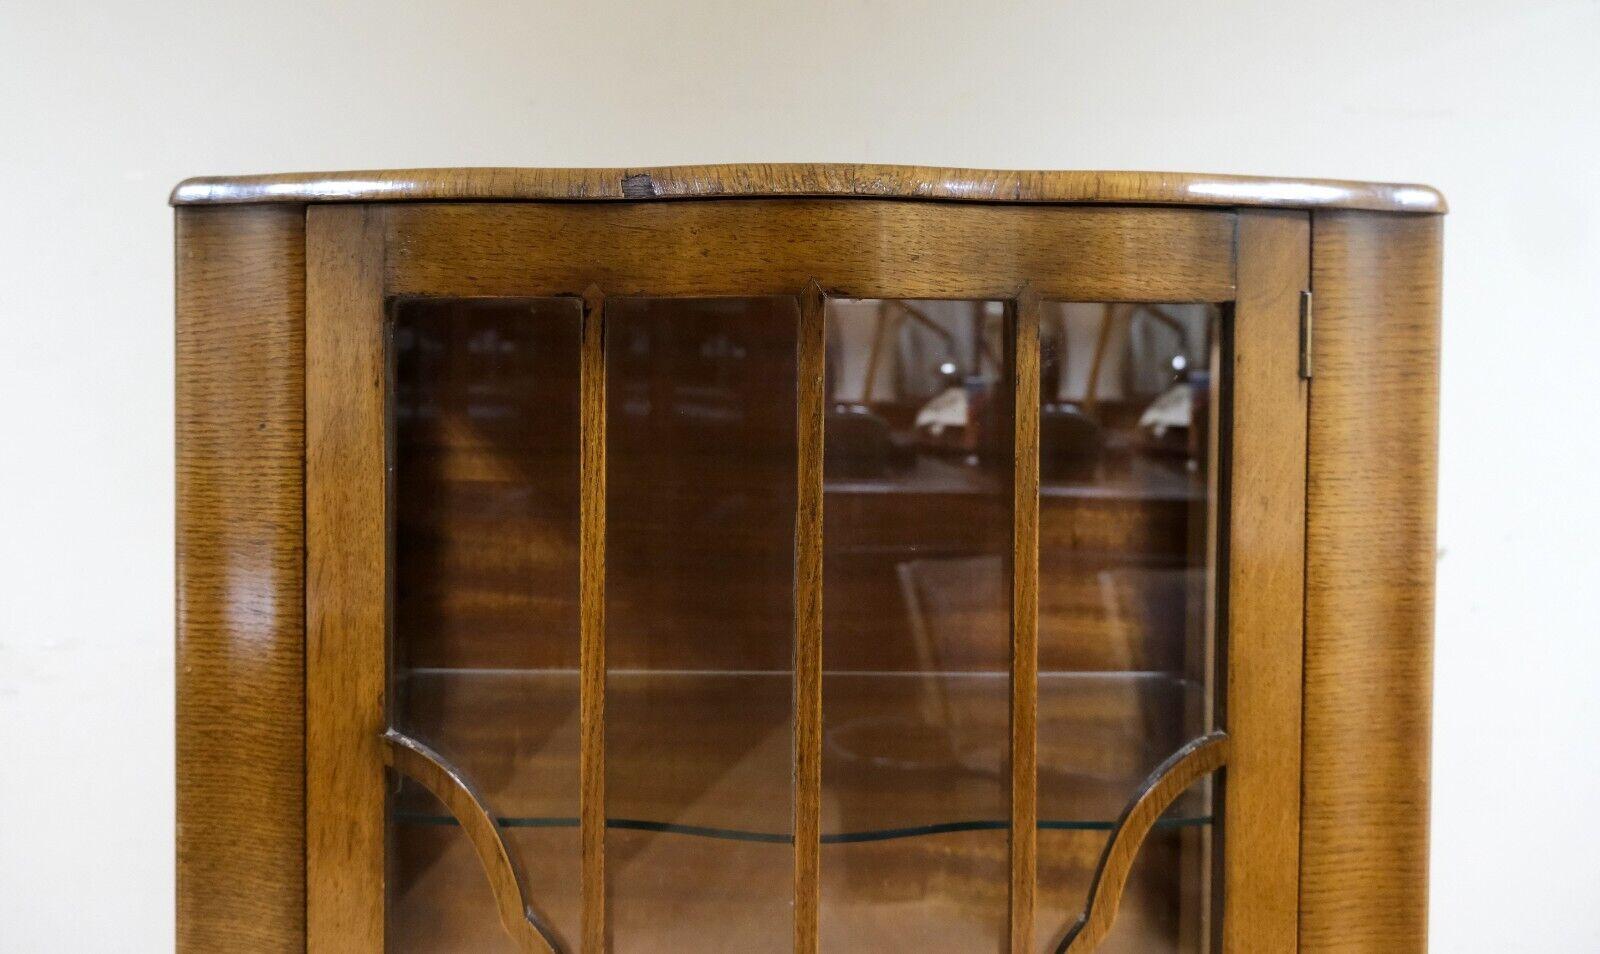 English SMALL GORGEOUS WALNUT GLAZED BOOKCASE WiTH GLASS SHELVES ON QUEEN ANN STYLE LEGS For Sale